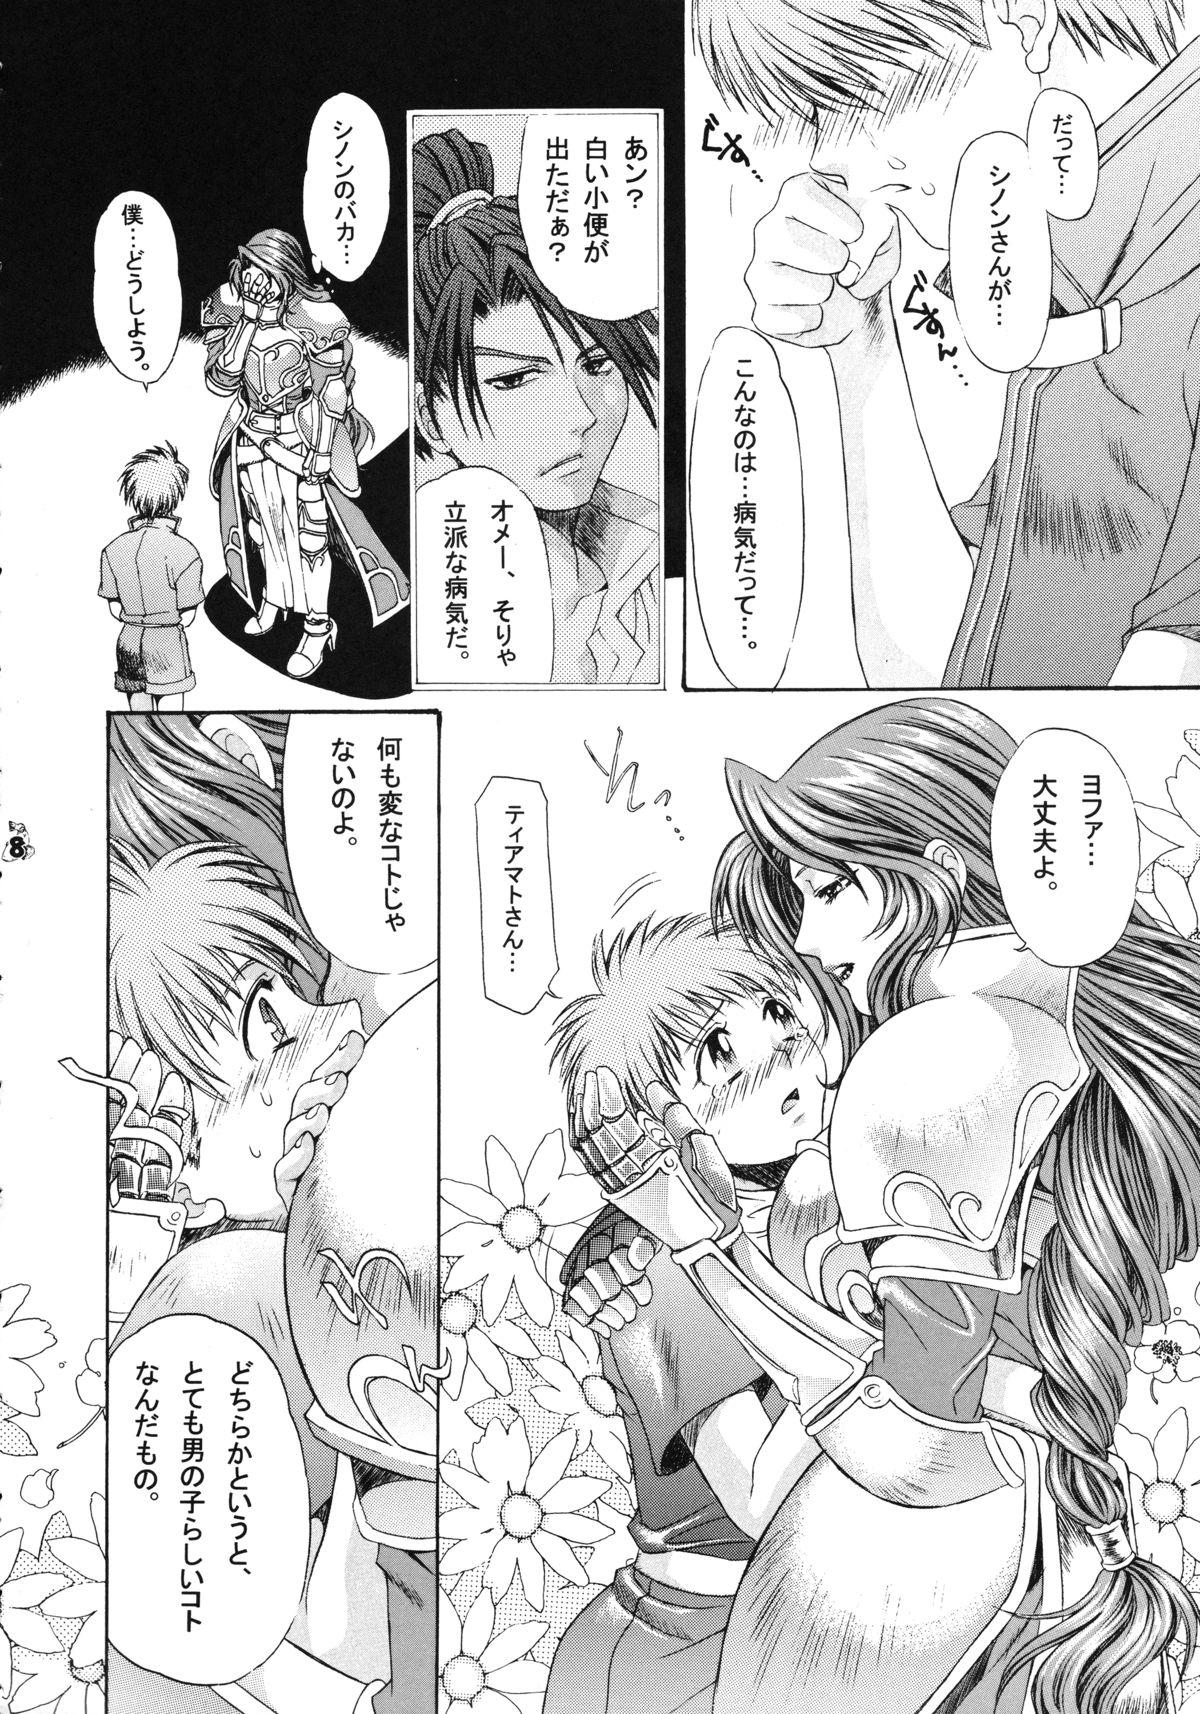 Sweet Dance of Welsh onion - Vocaloid Bleach Fire emblem path of radiance Stepdaughter - Page 7